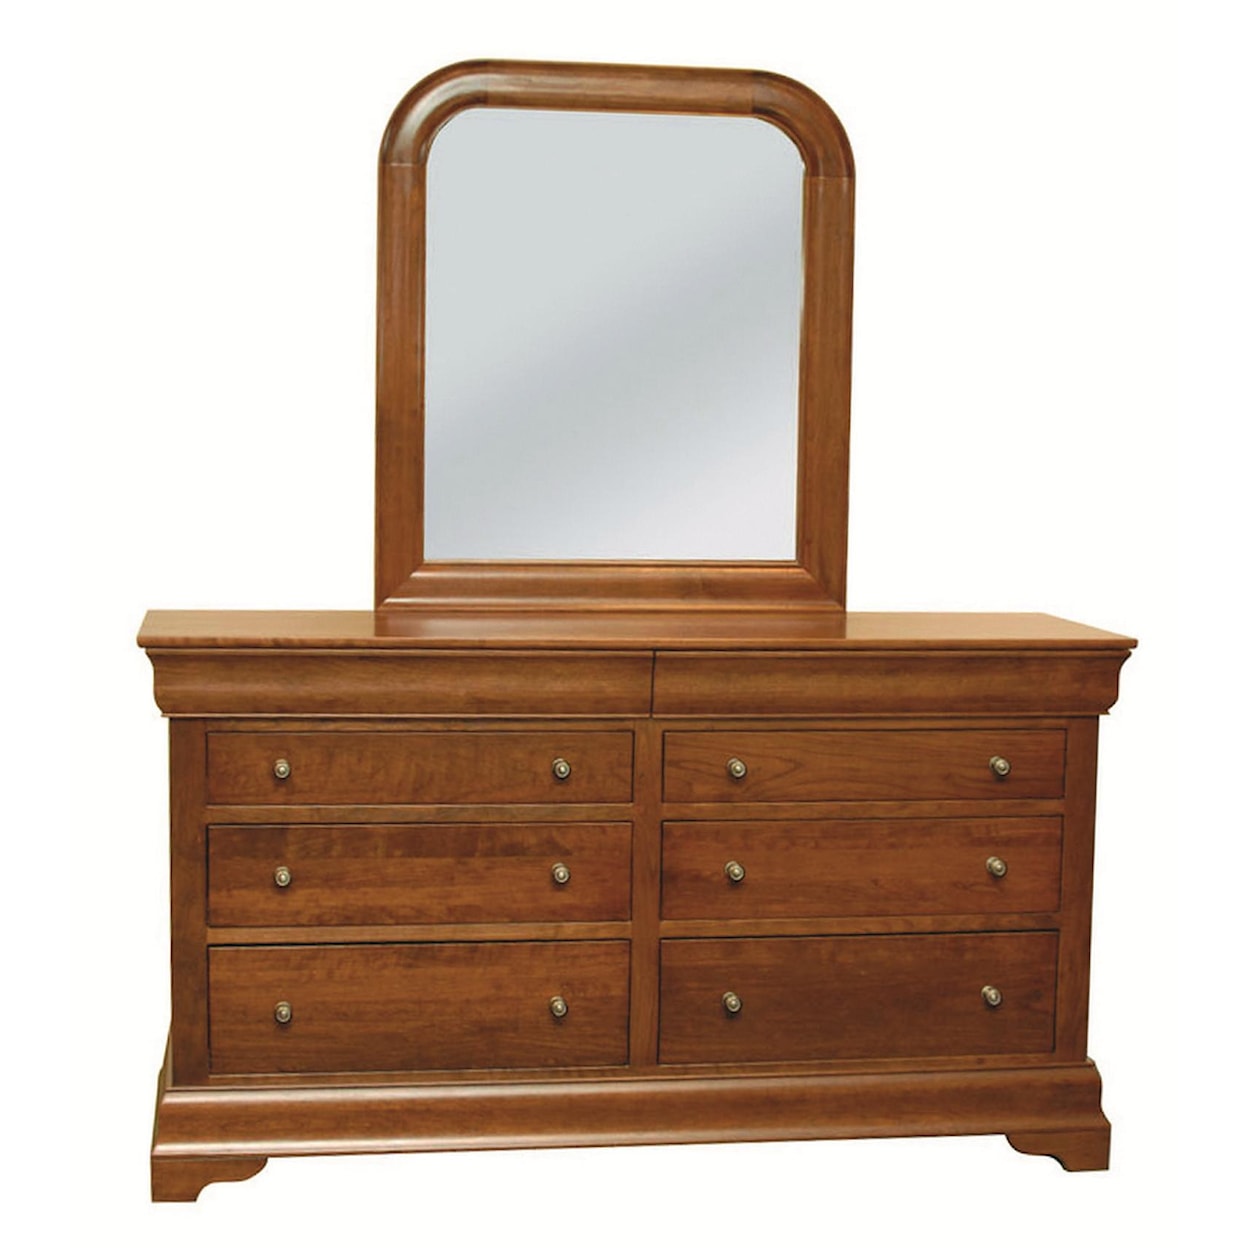 The Urban Collection Bordeaux Six Drawer Dresser and Rounded Mirror Set